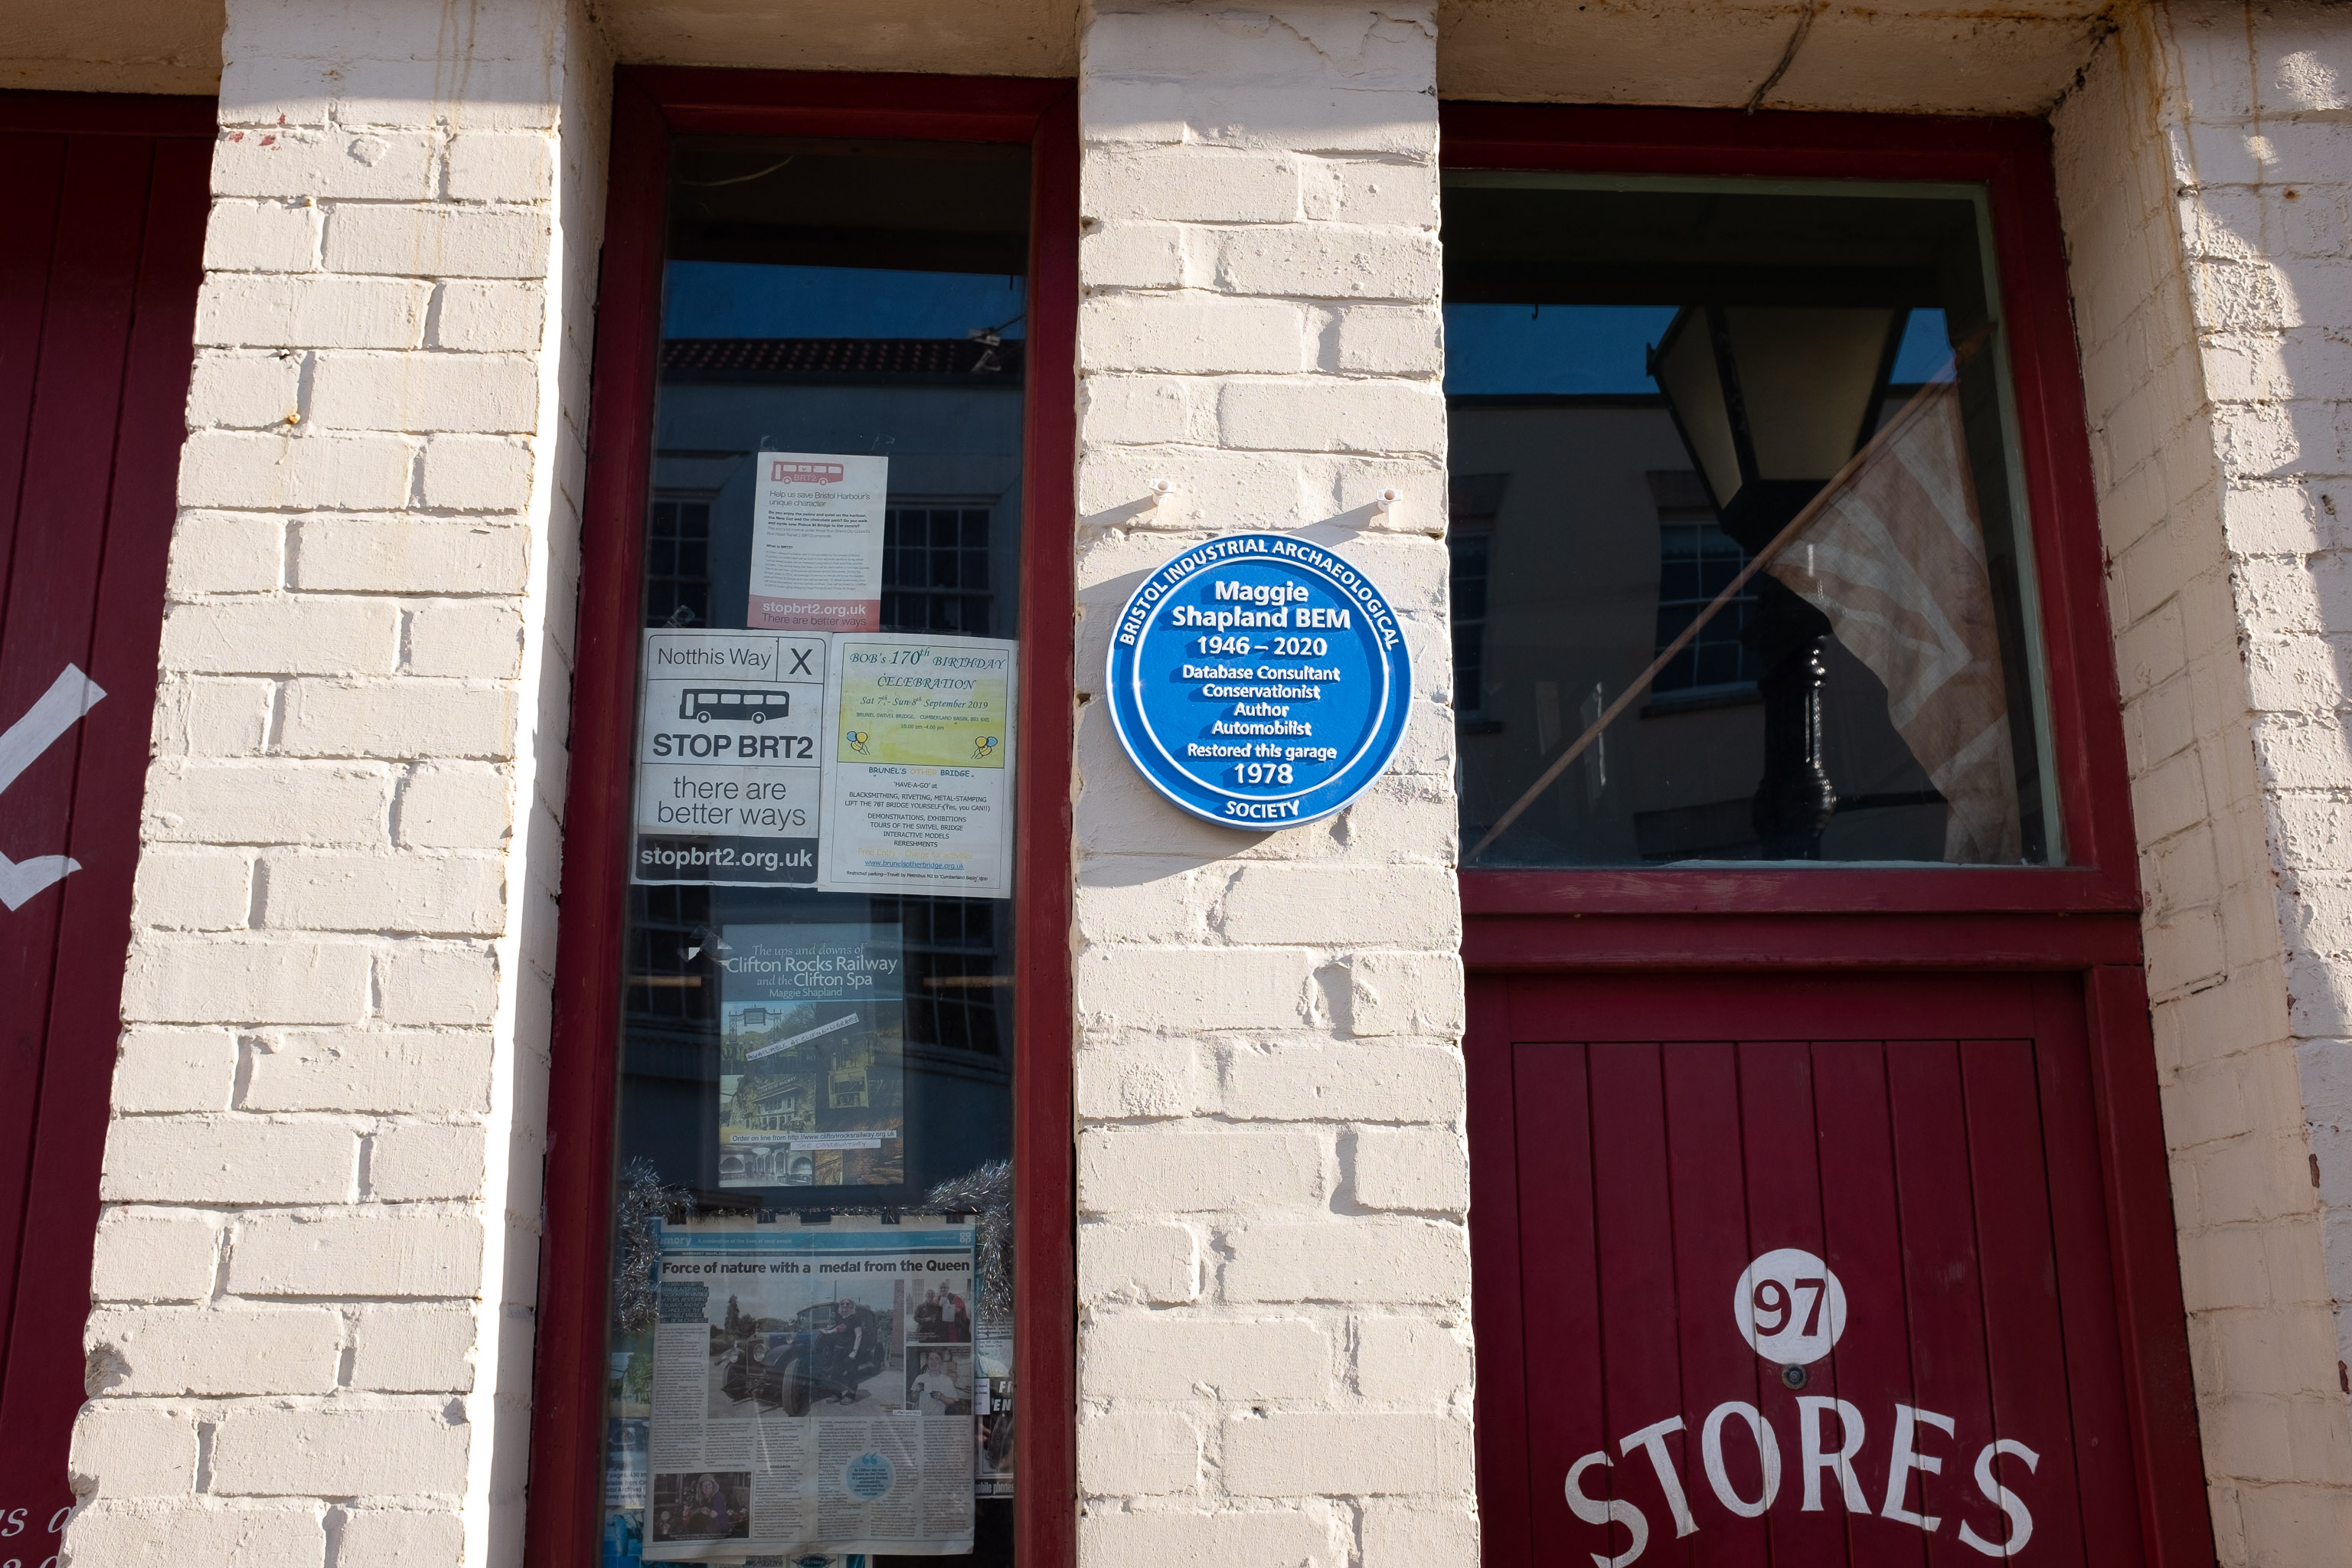 Maggie Shapland BEM
The late, great Maggie Shapland was a familiar feature to anyone interested in historical industry in Bristol.

I think the first time I saw her wa...